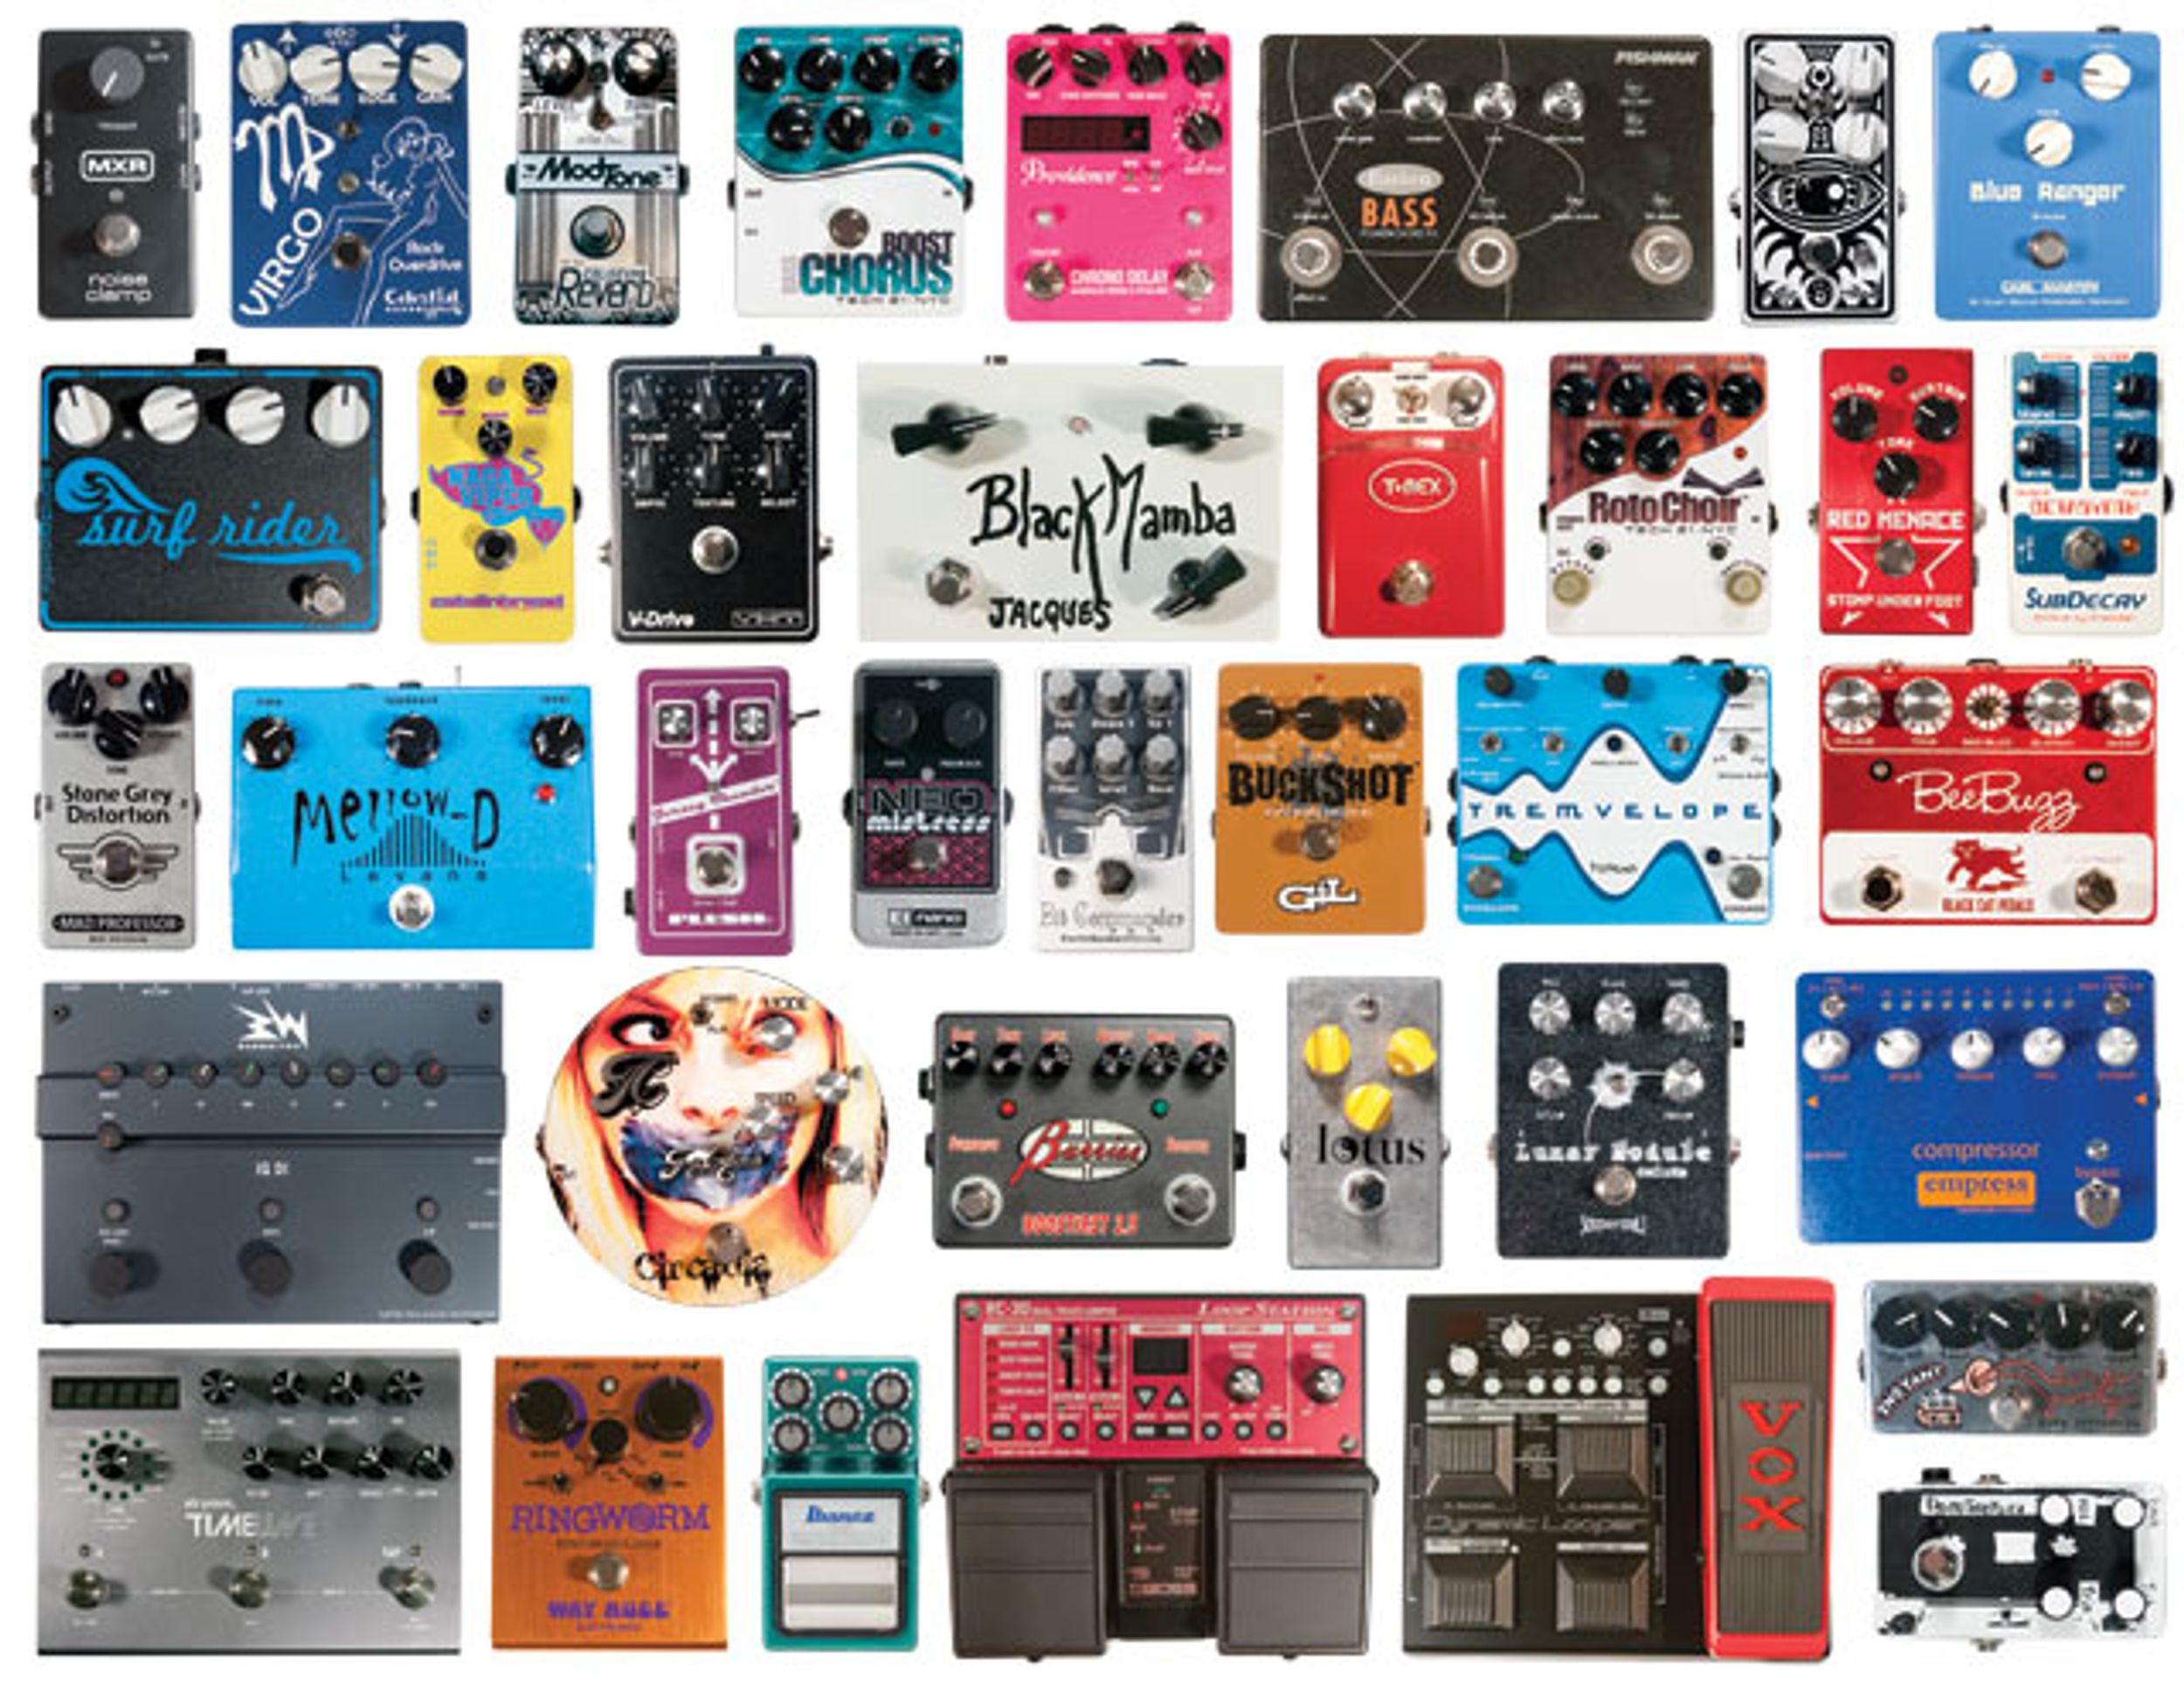 2011 Pedal Roundup: 37 Stompboxes Reviewed